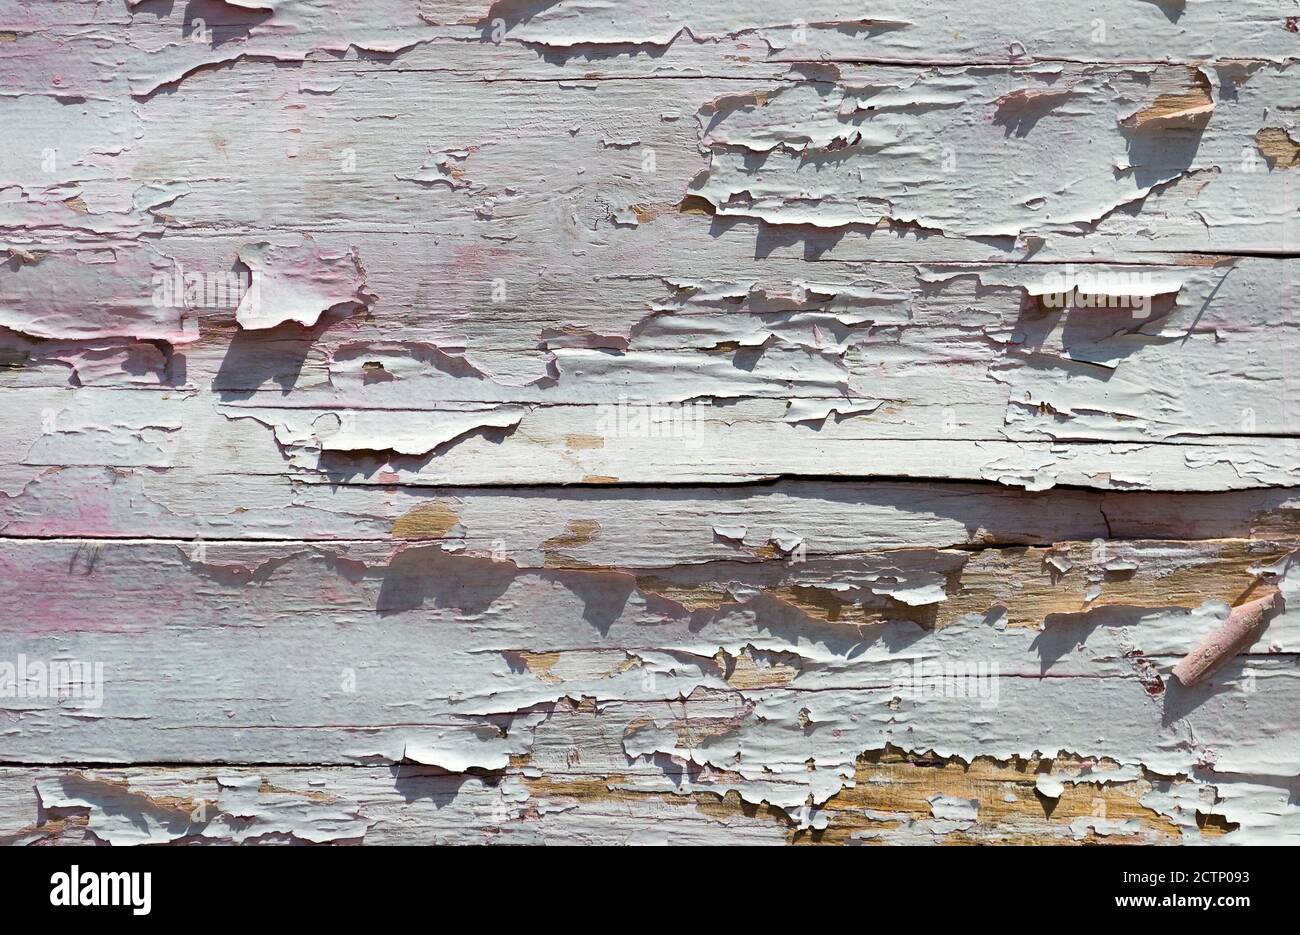 Cracked paint on a wooden wall. Wall from wooden planks with paint traces. Grunge background, cracked paint. Stock Photo